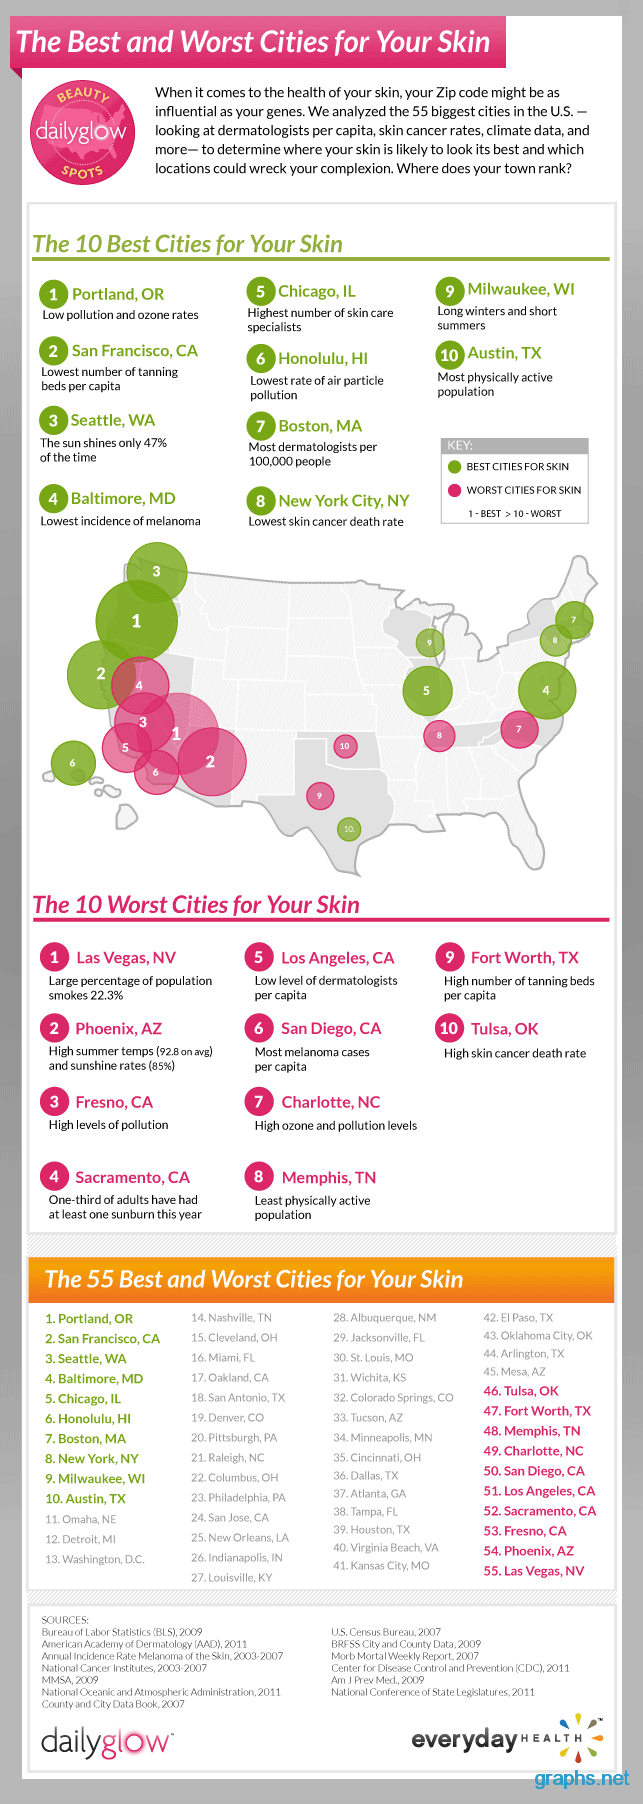 America's Best and Worst Cities For Your Skin